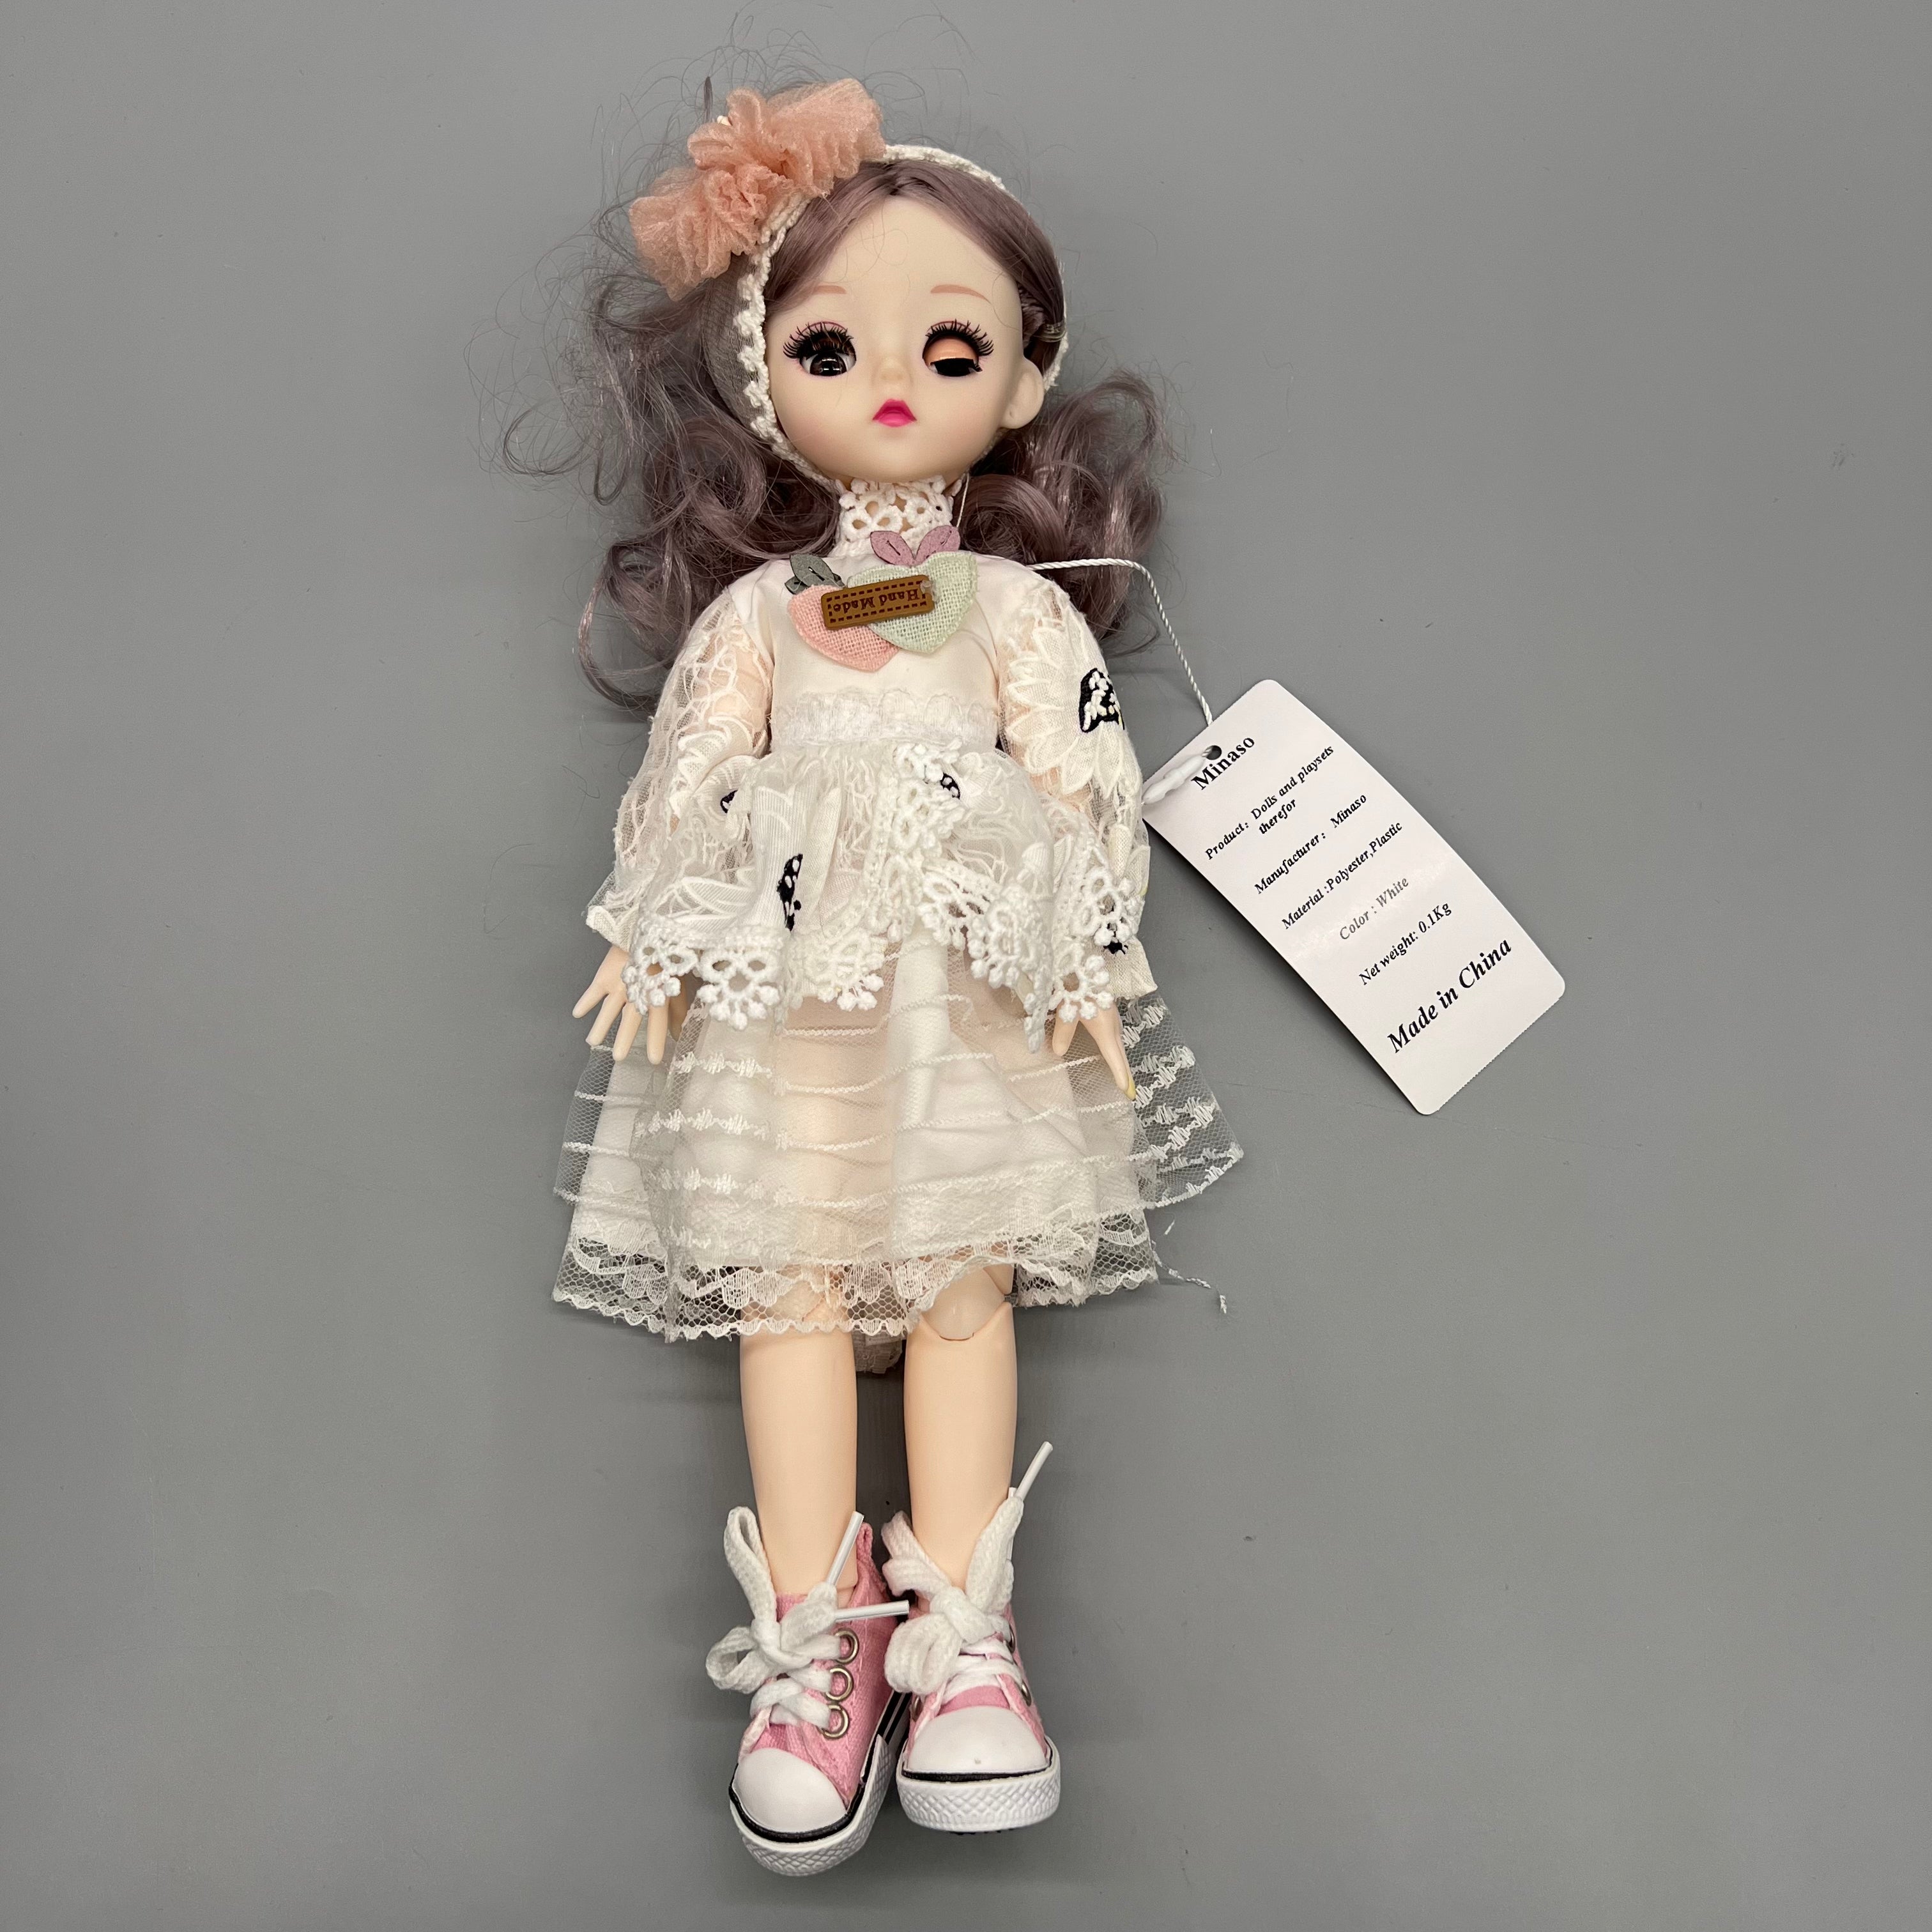 Minaso Dolls and playsets therefor,Girls Doll Clothes and Accessories ...